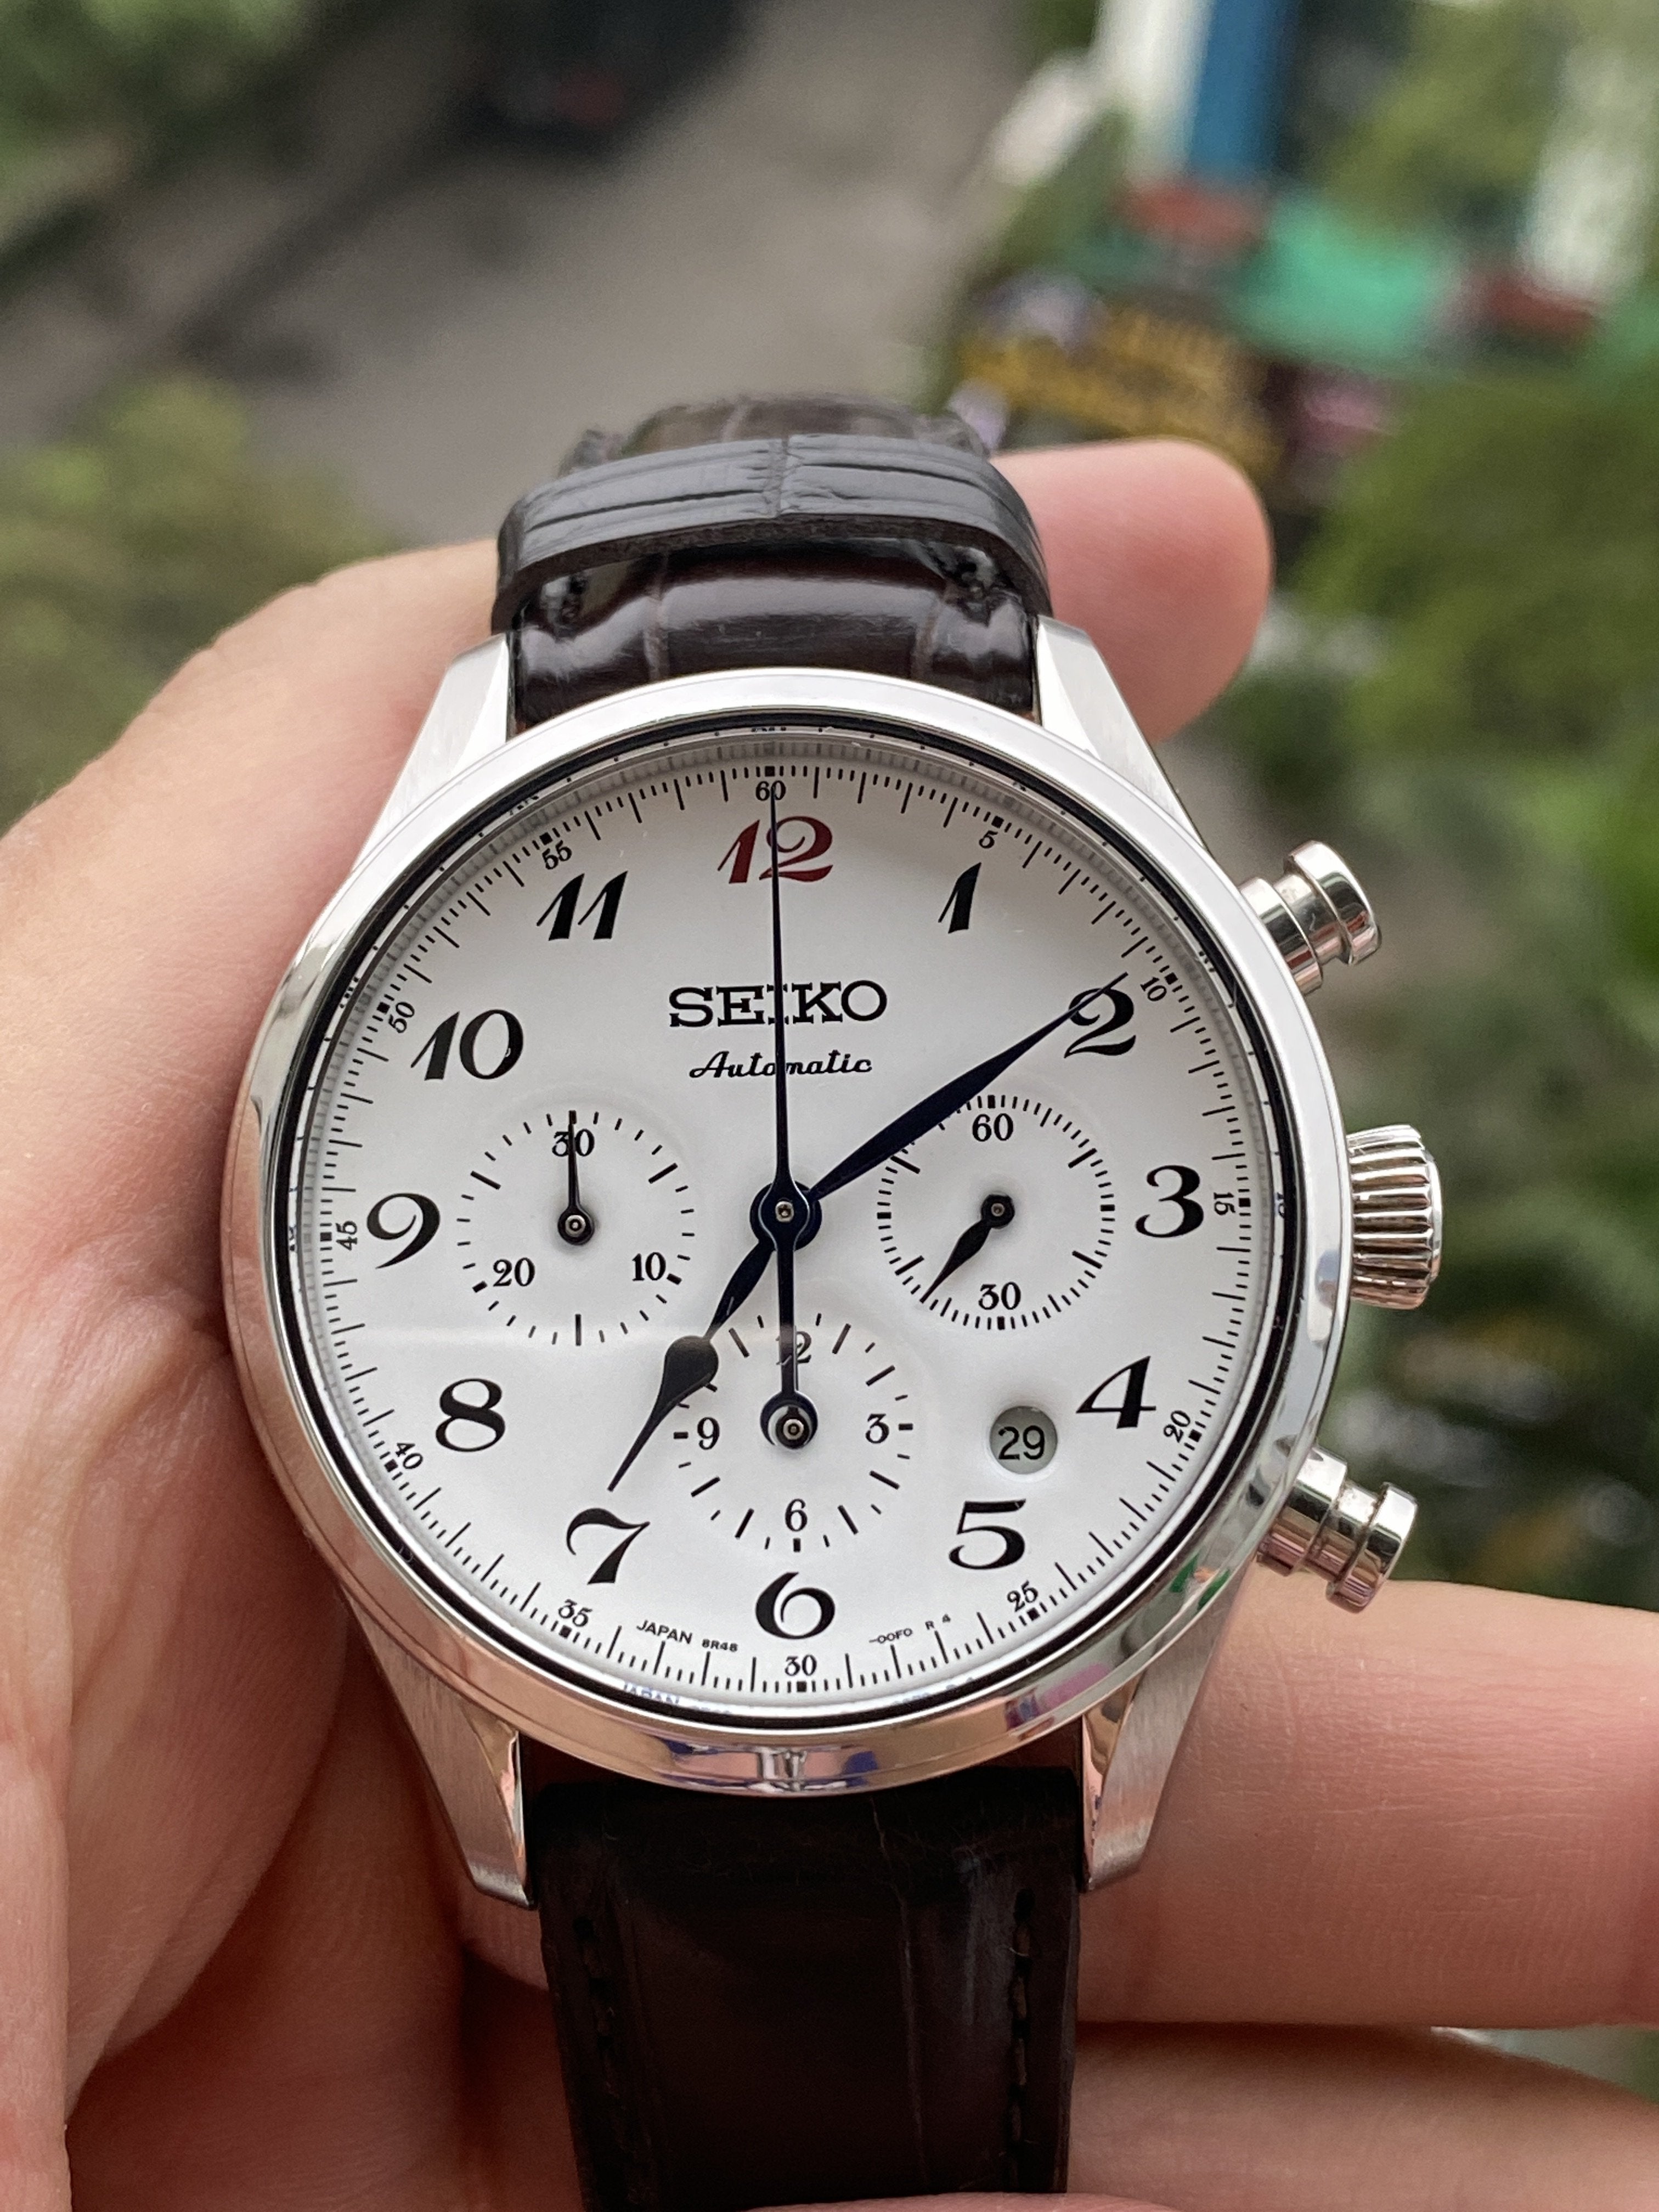 SODL): Seiko SARK001 - White Enamel Automatic -Limited Edition of 1000  Watch LE JDM | WatchUSeek Watch Forums